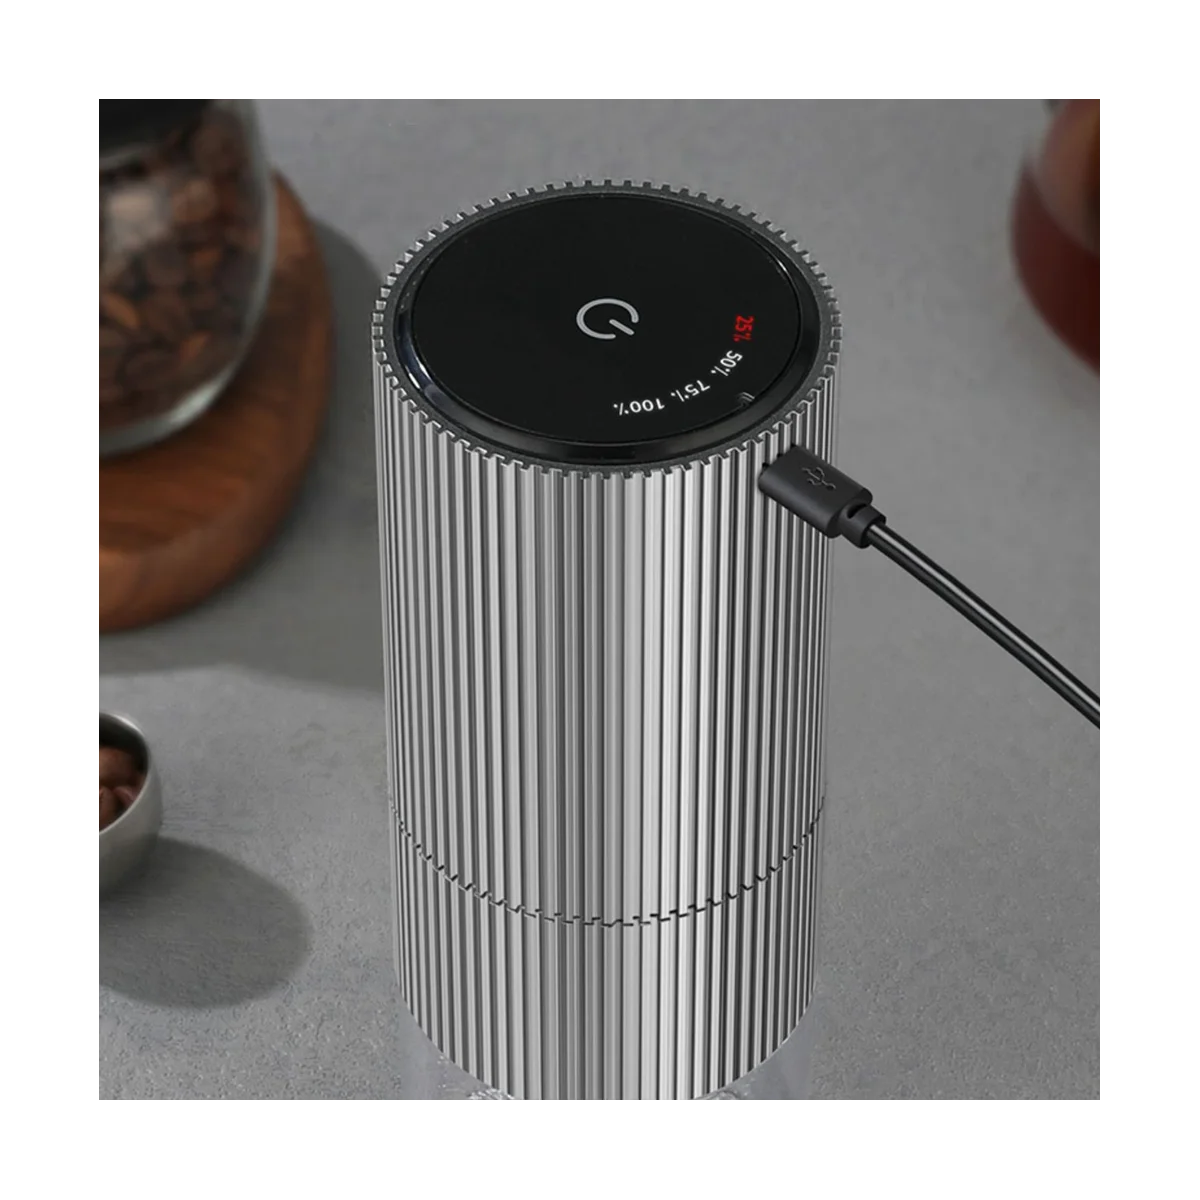 

Electric Coffee Grinder Automatic Coffee Beans Spice Mill Espresso Coffee Machine Maker USB Charger Grinder Silver